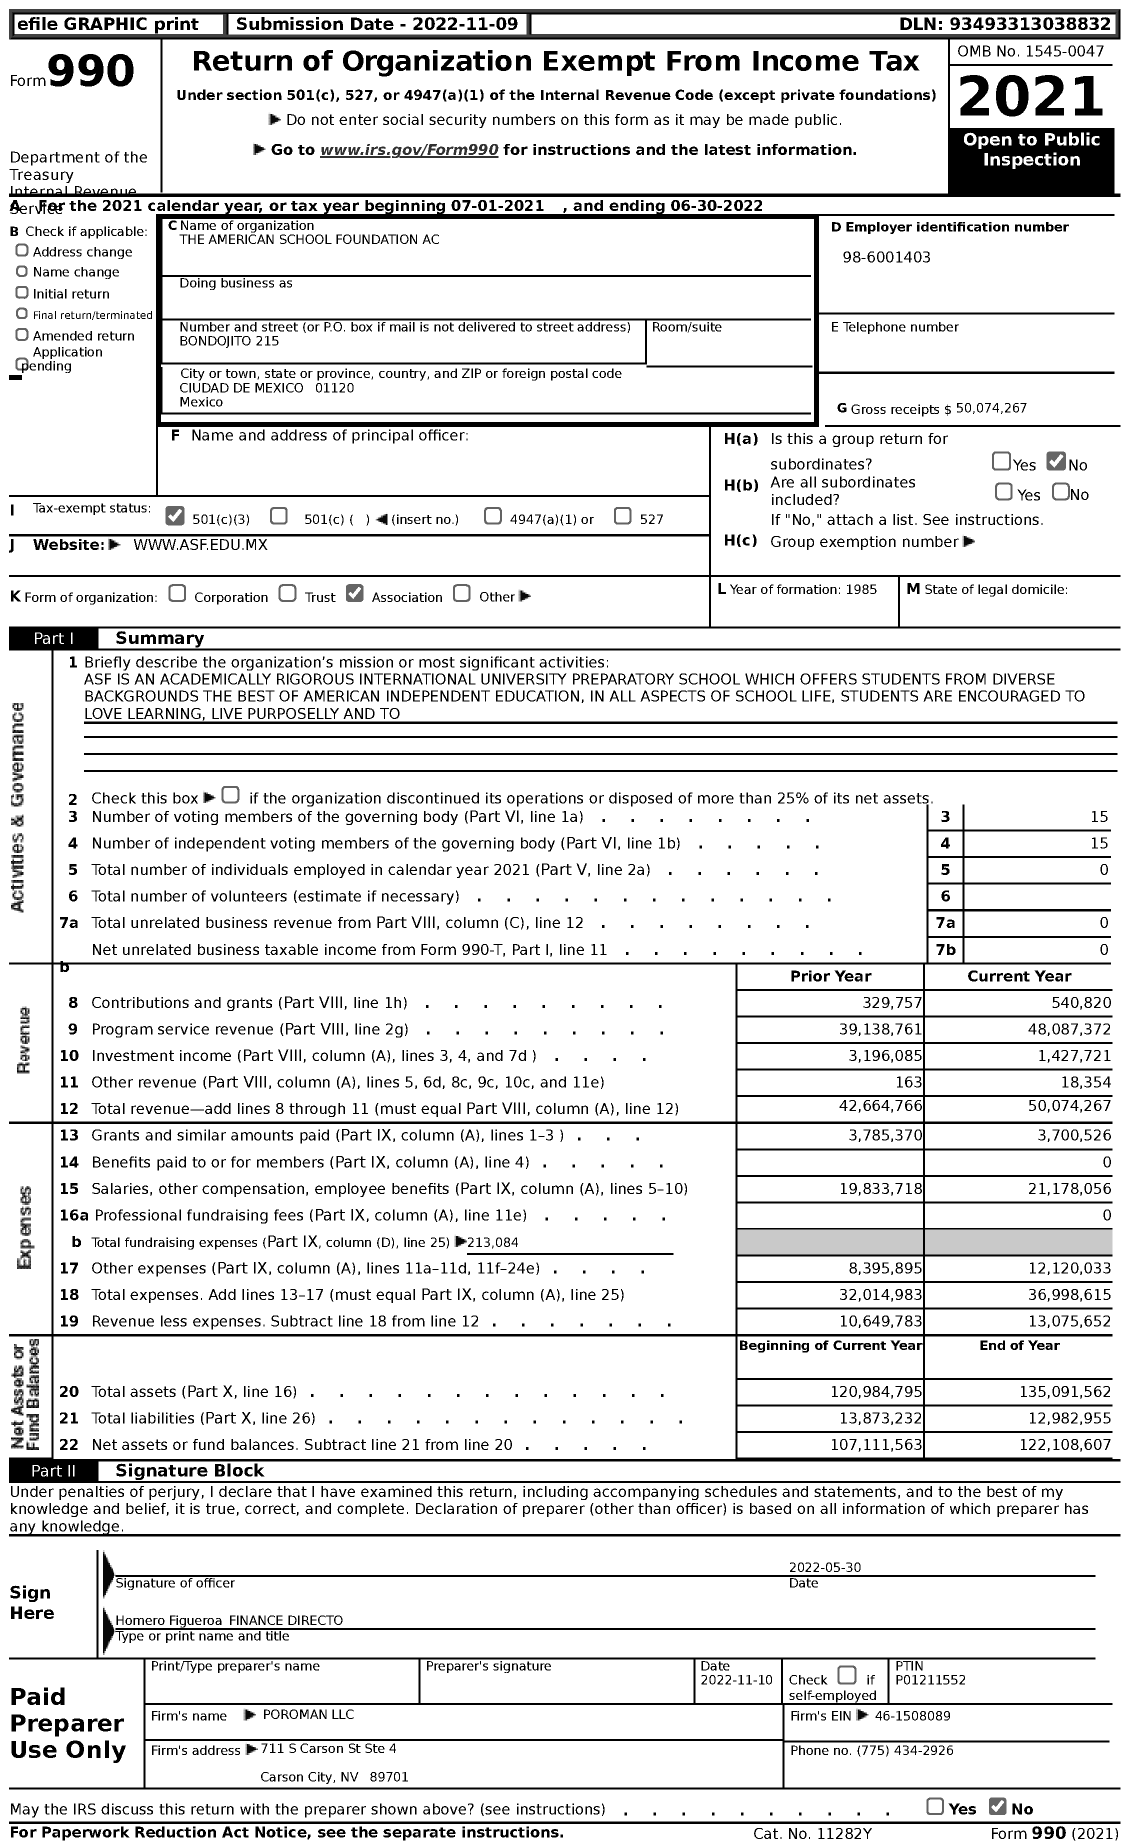 Image of first page of 2021 Form 990 for The American School Foundation Ac (ASF)